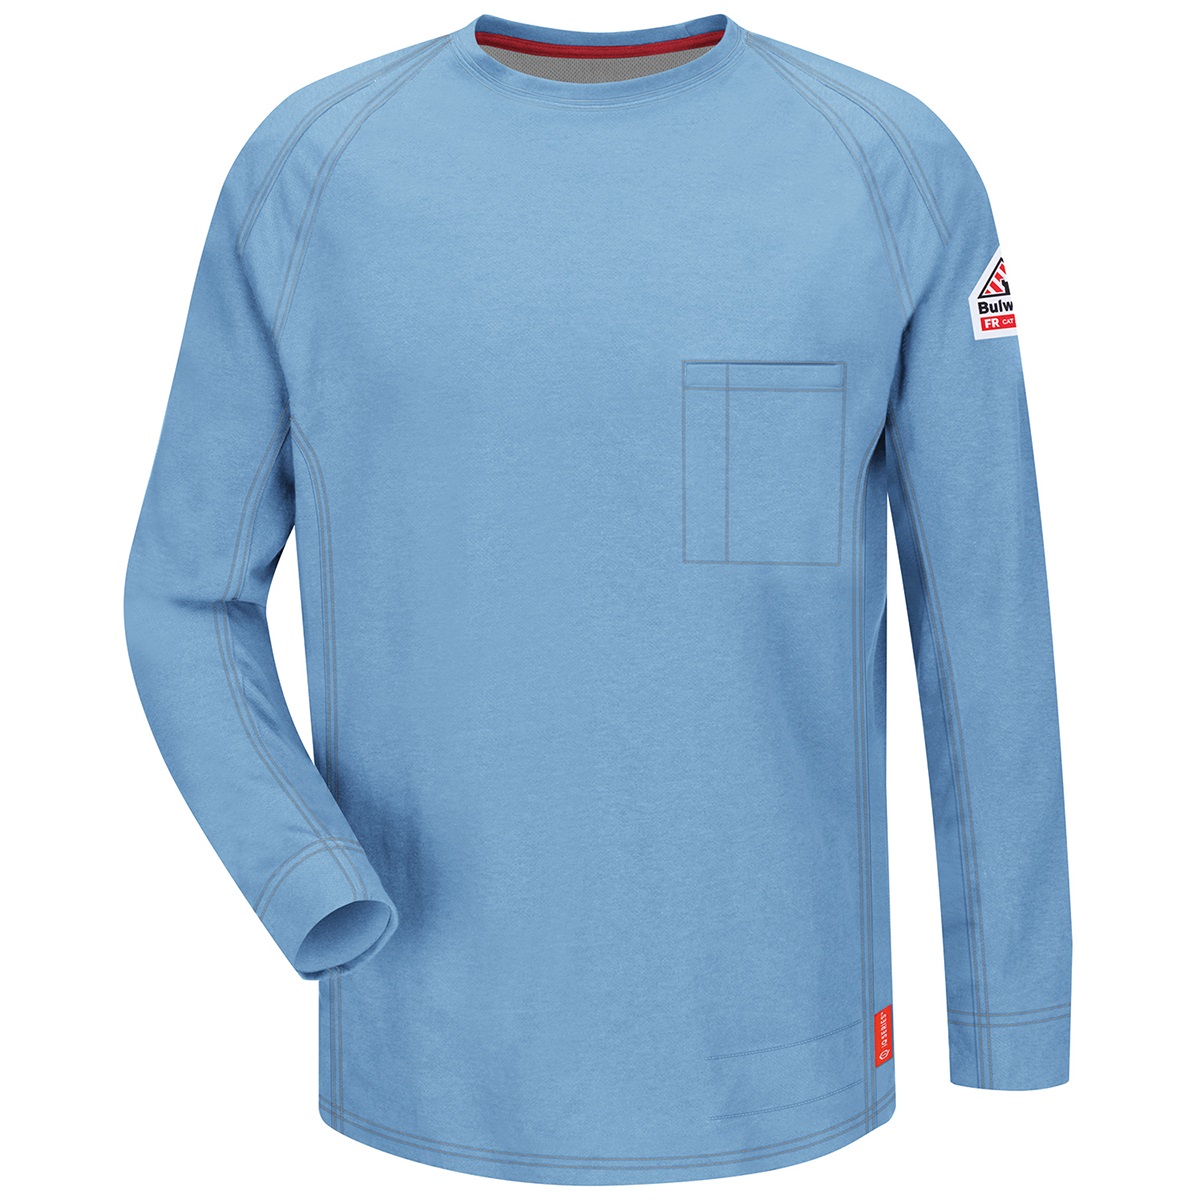 iQ Flame Resistant Long Sleeve T-Shirt in Blue